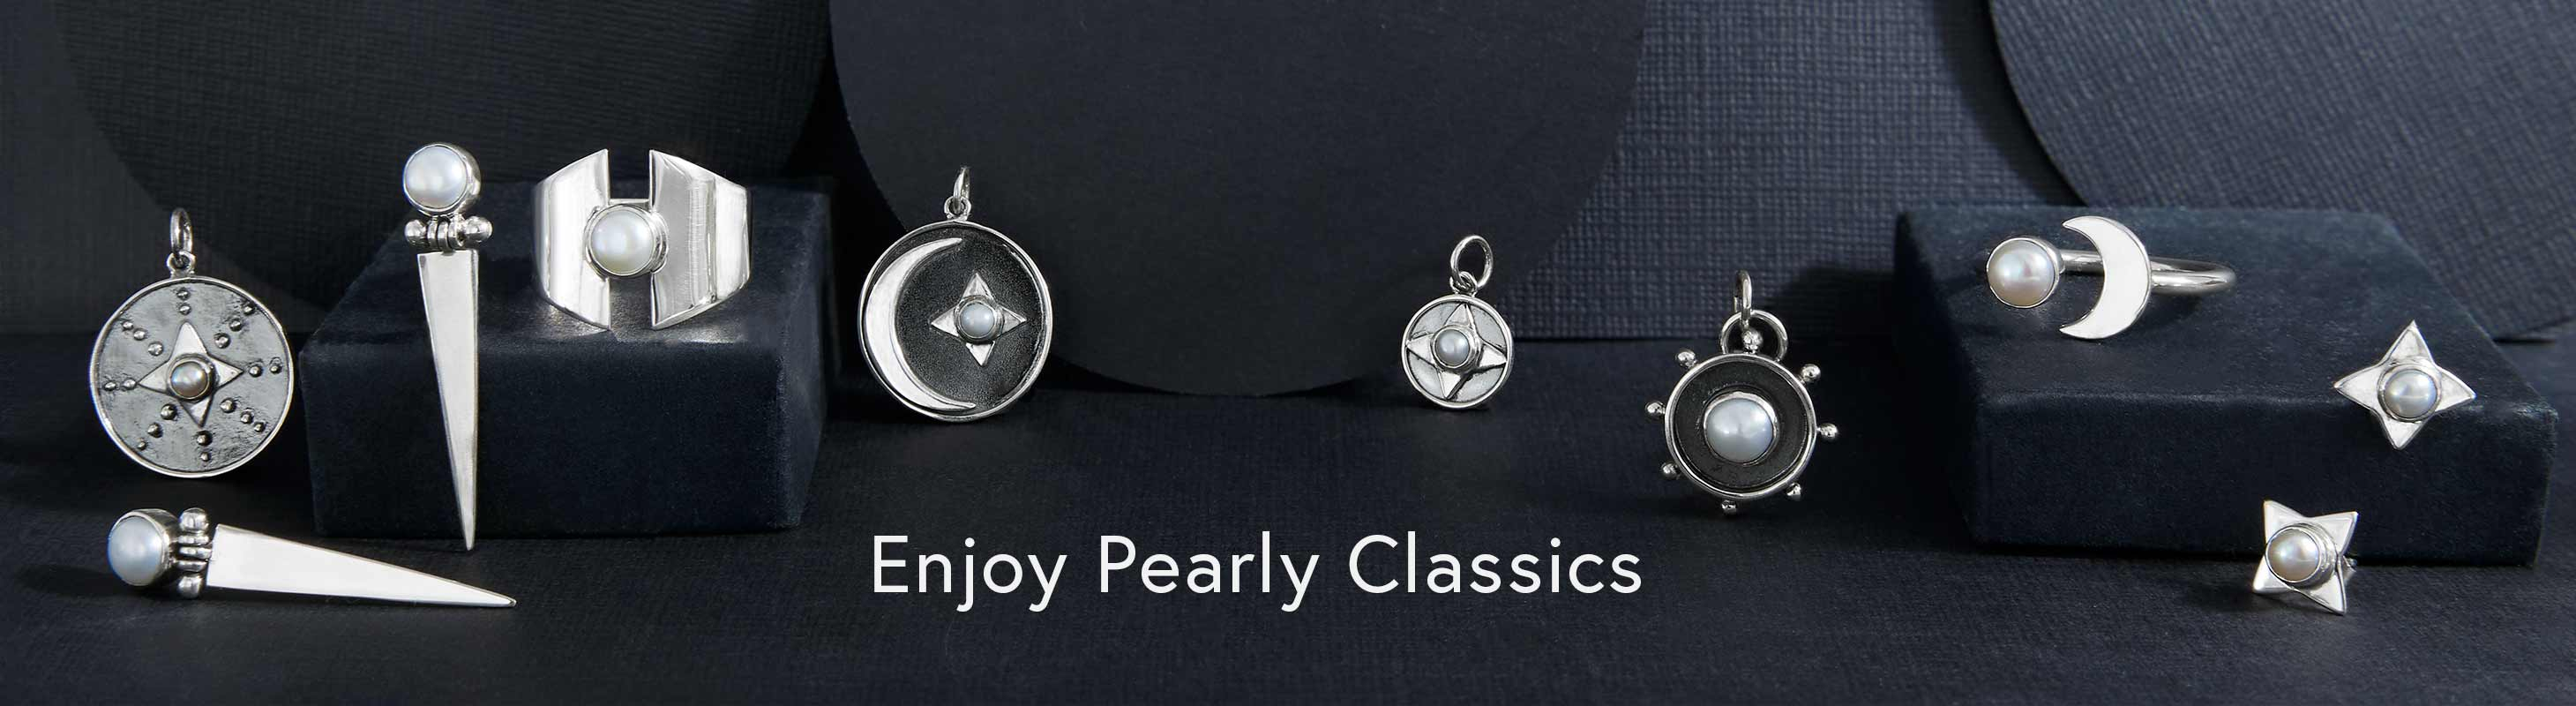 Enjoy pearly classics. Pearl charms, pearl rings and more.